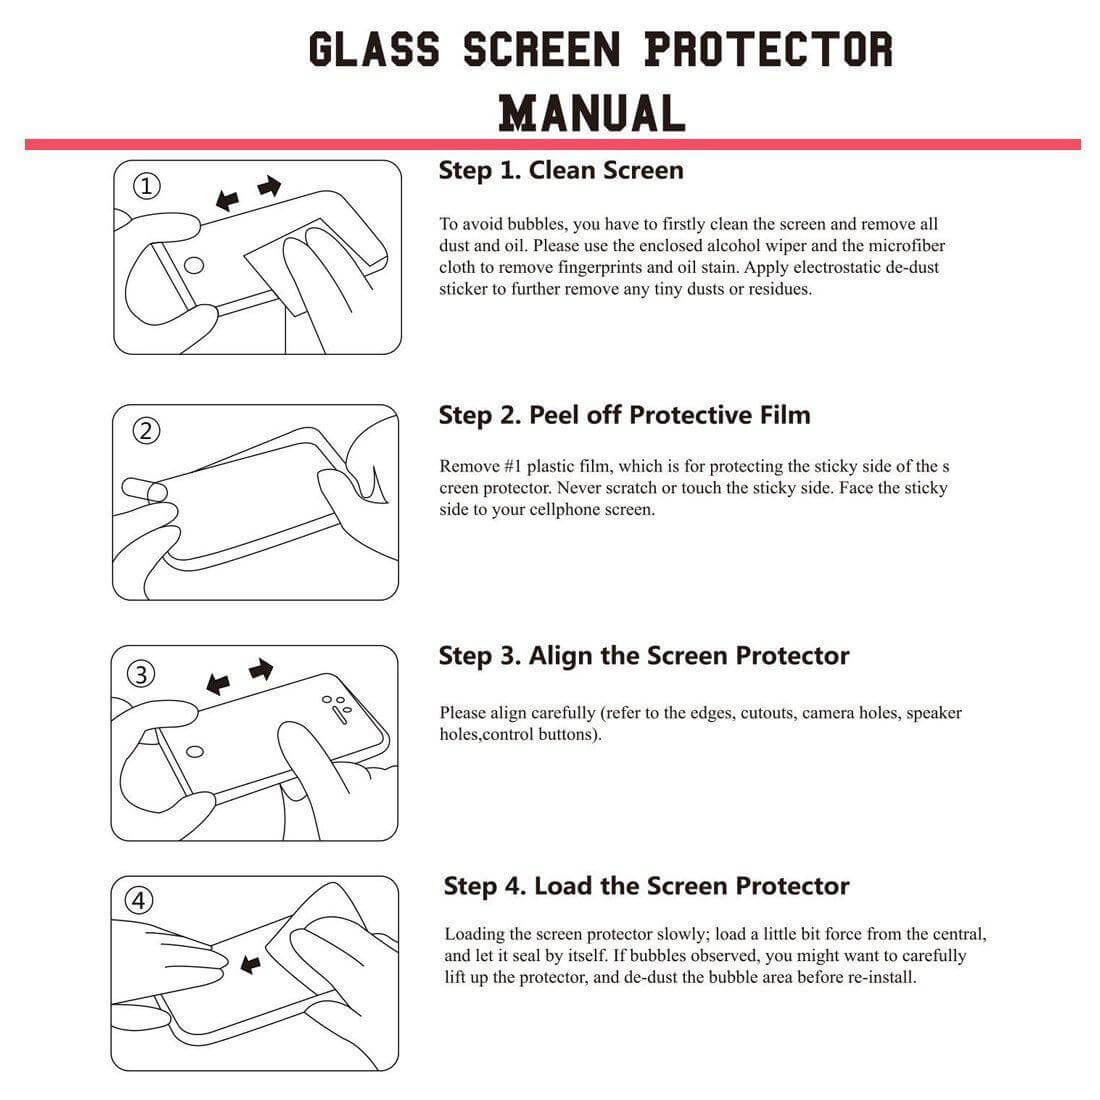 For Huawei MatePad 11 2021 Tempered Glass Screen Protector-Huawei Tablet Tempered Glass-First Help Tech